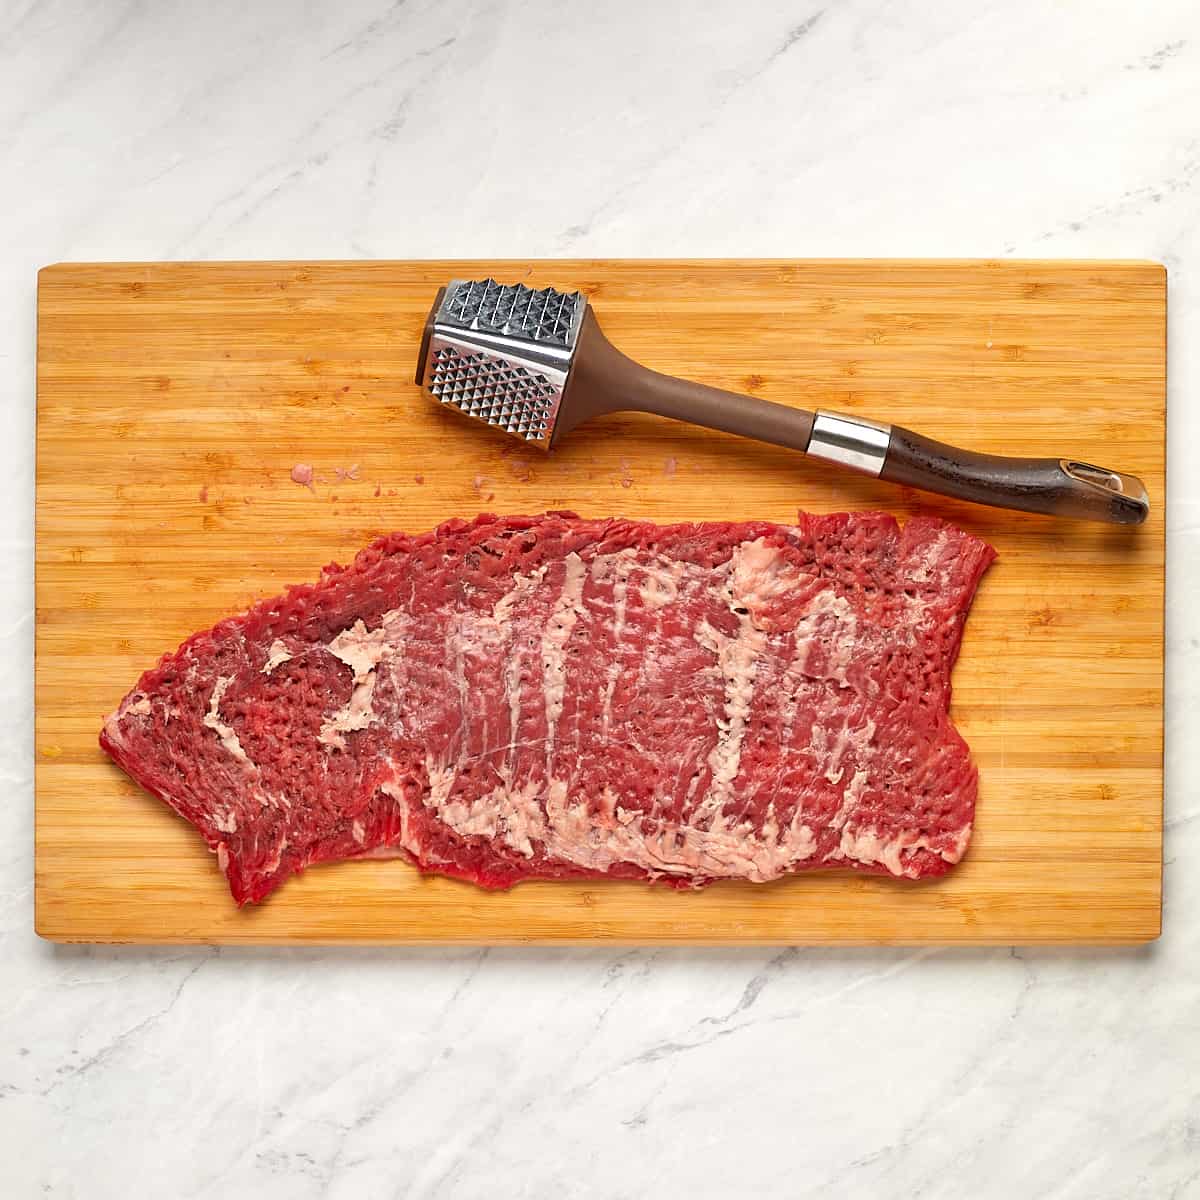 skirt steak on a cutting board with a meat mallet after being tenderized.